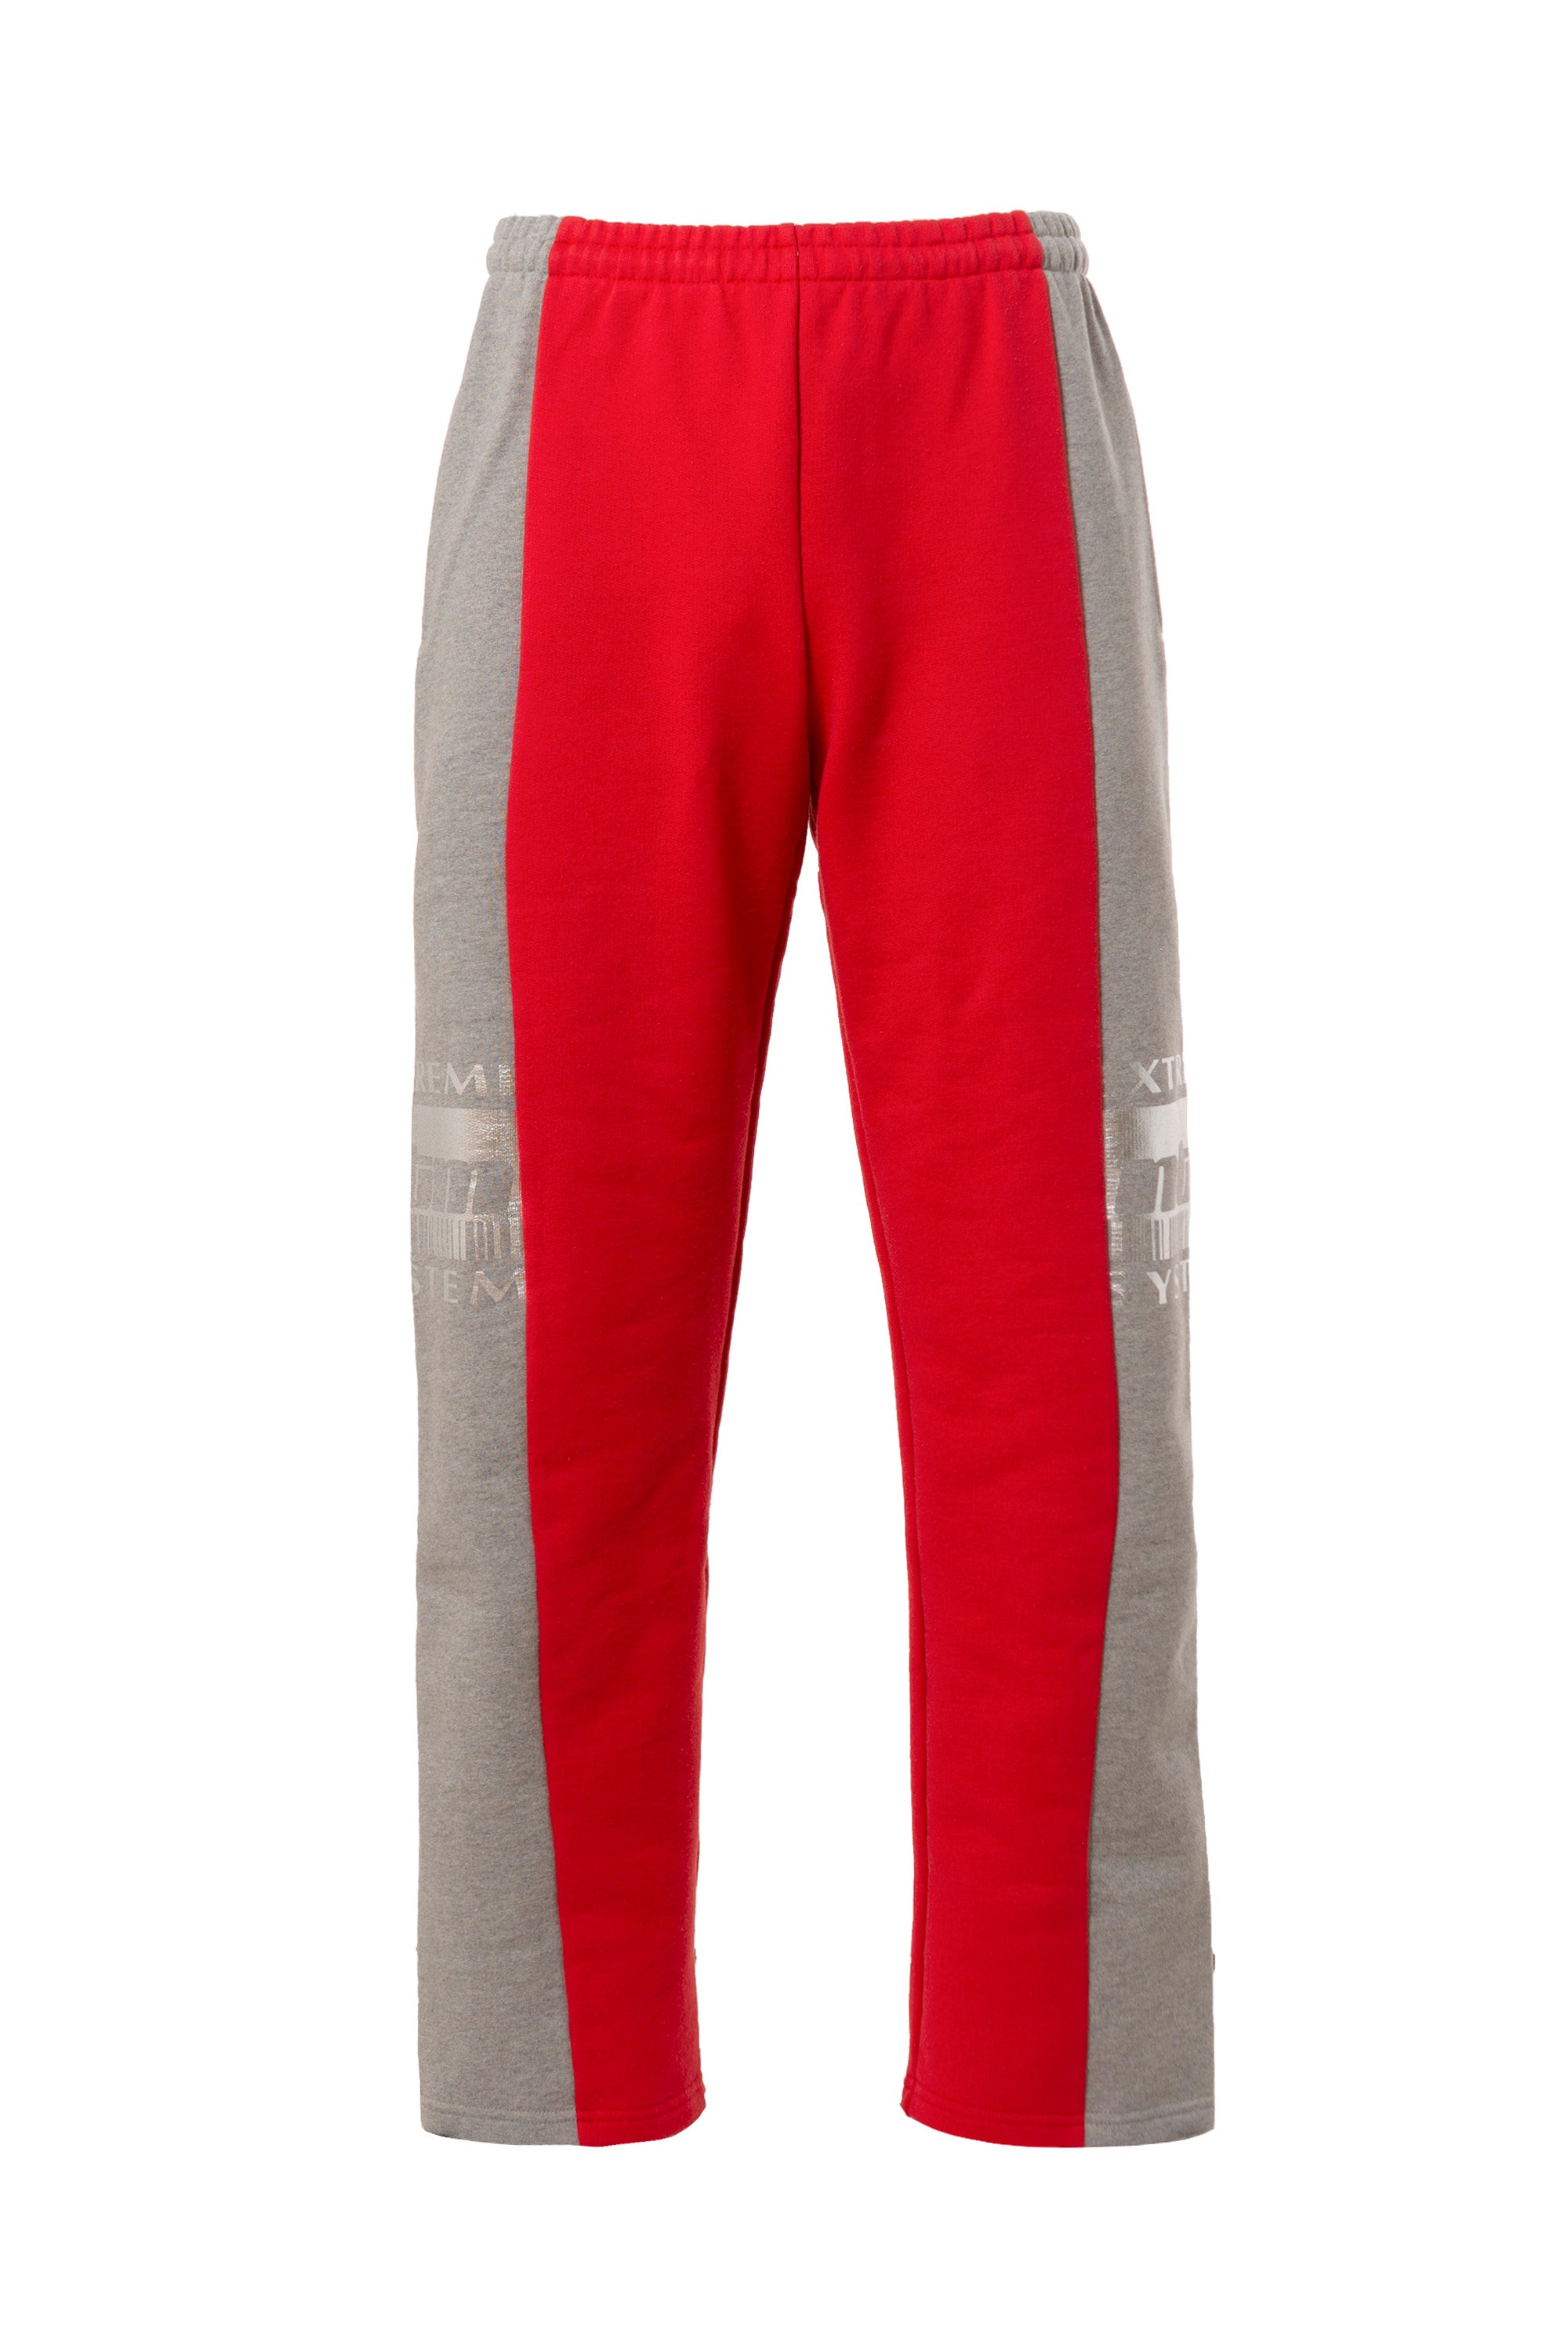 VTMNTS SS23 EXTREME SYSTEM PANTS / RED GRY - NUBIAN